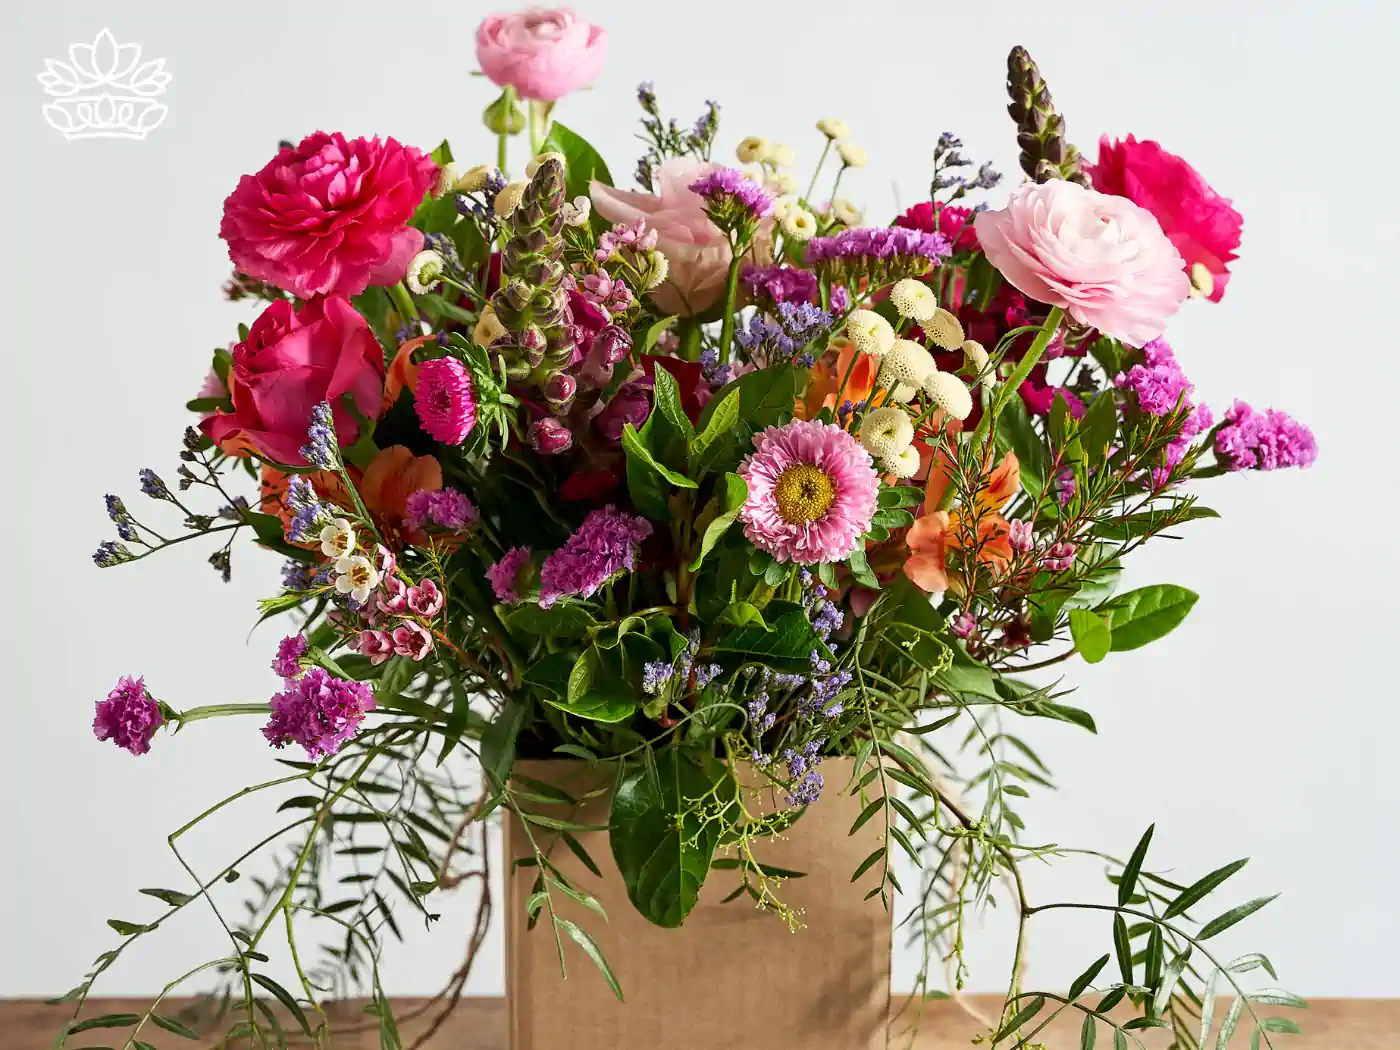 Vibrant bouquet of assorted flowers including roses, gerberas, and lavender in a rustic brown paper bag. Fabulous Flowers and Gifts - Housewarming. Delivered with Heart.